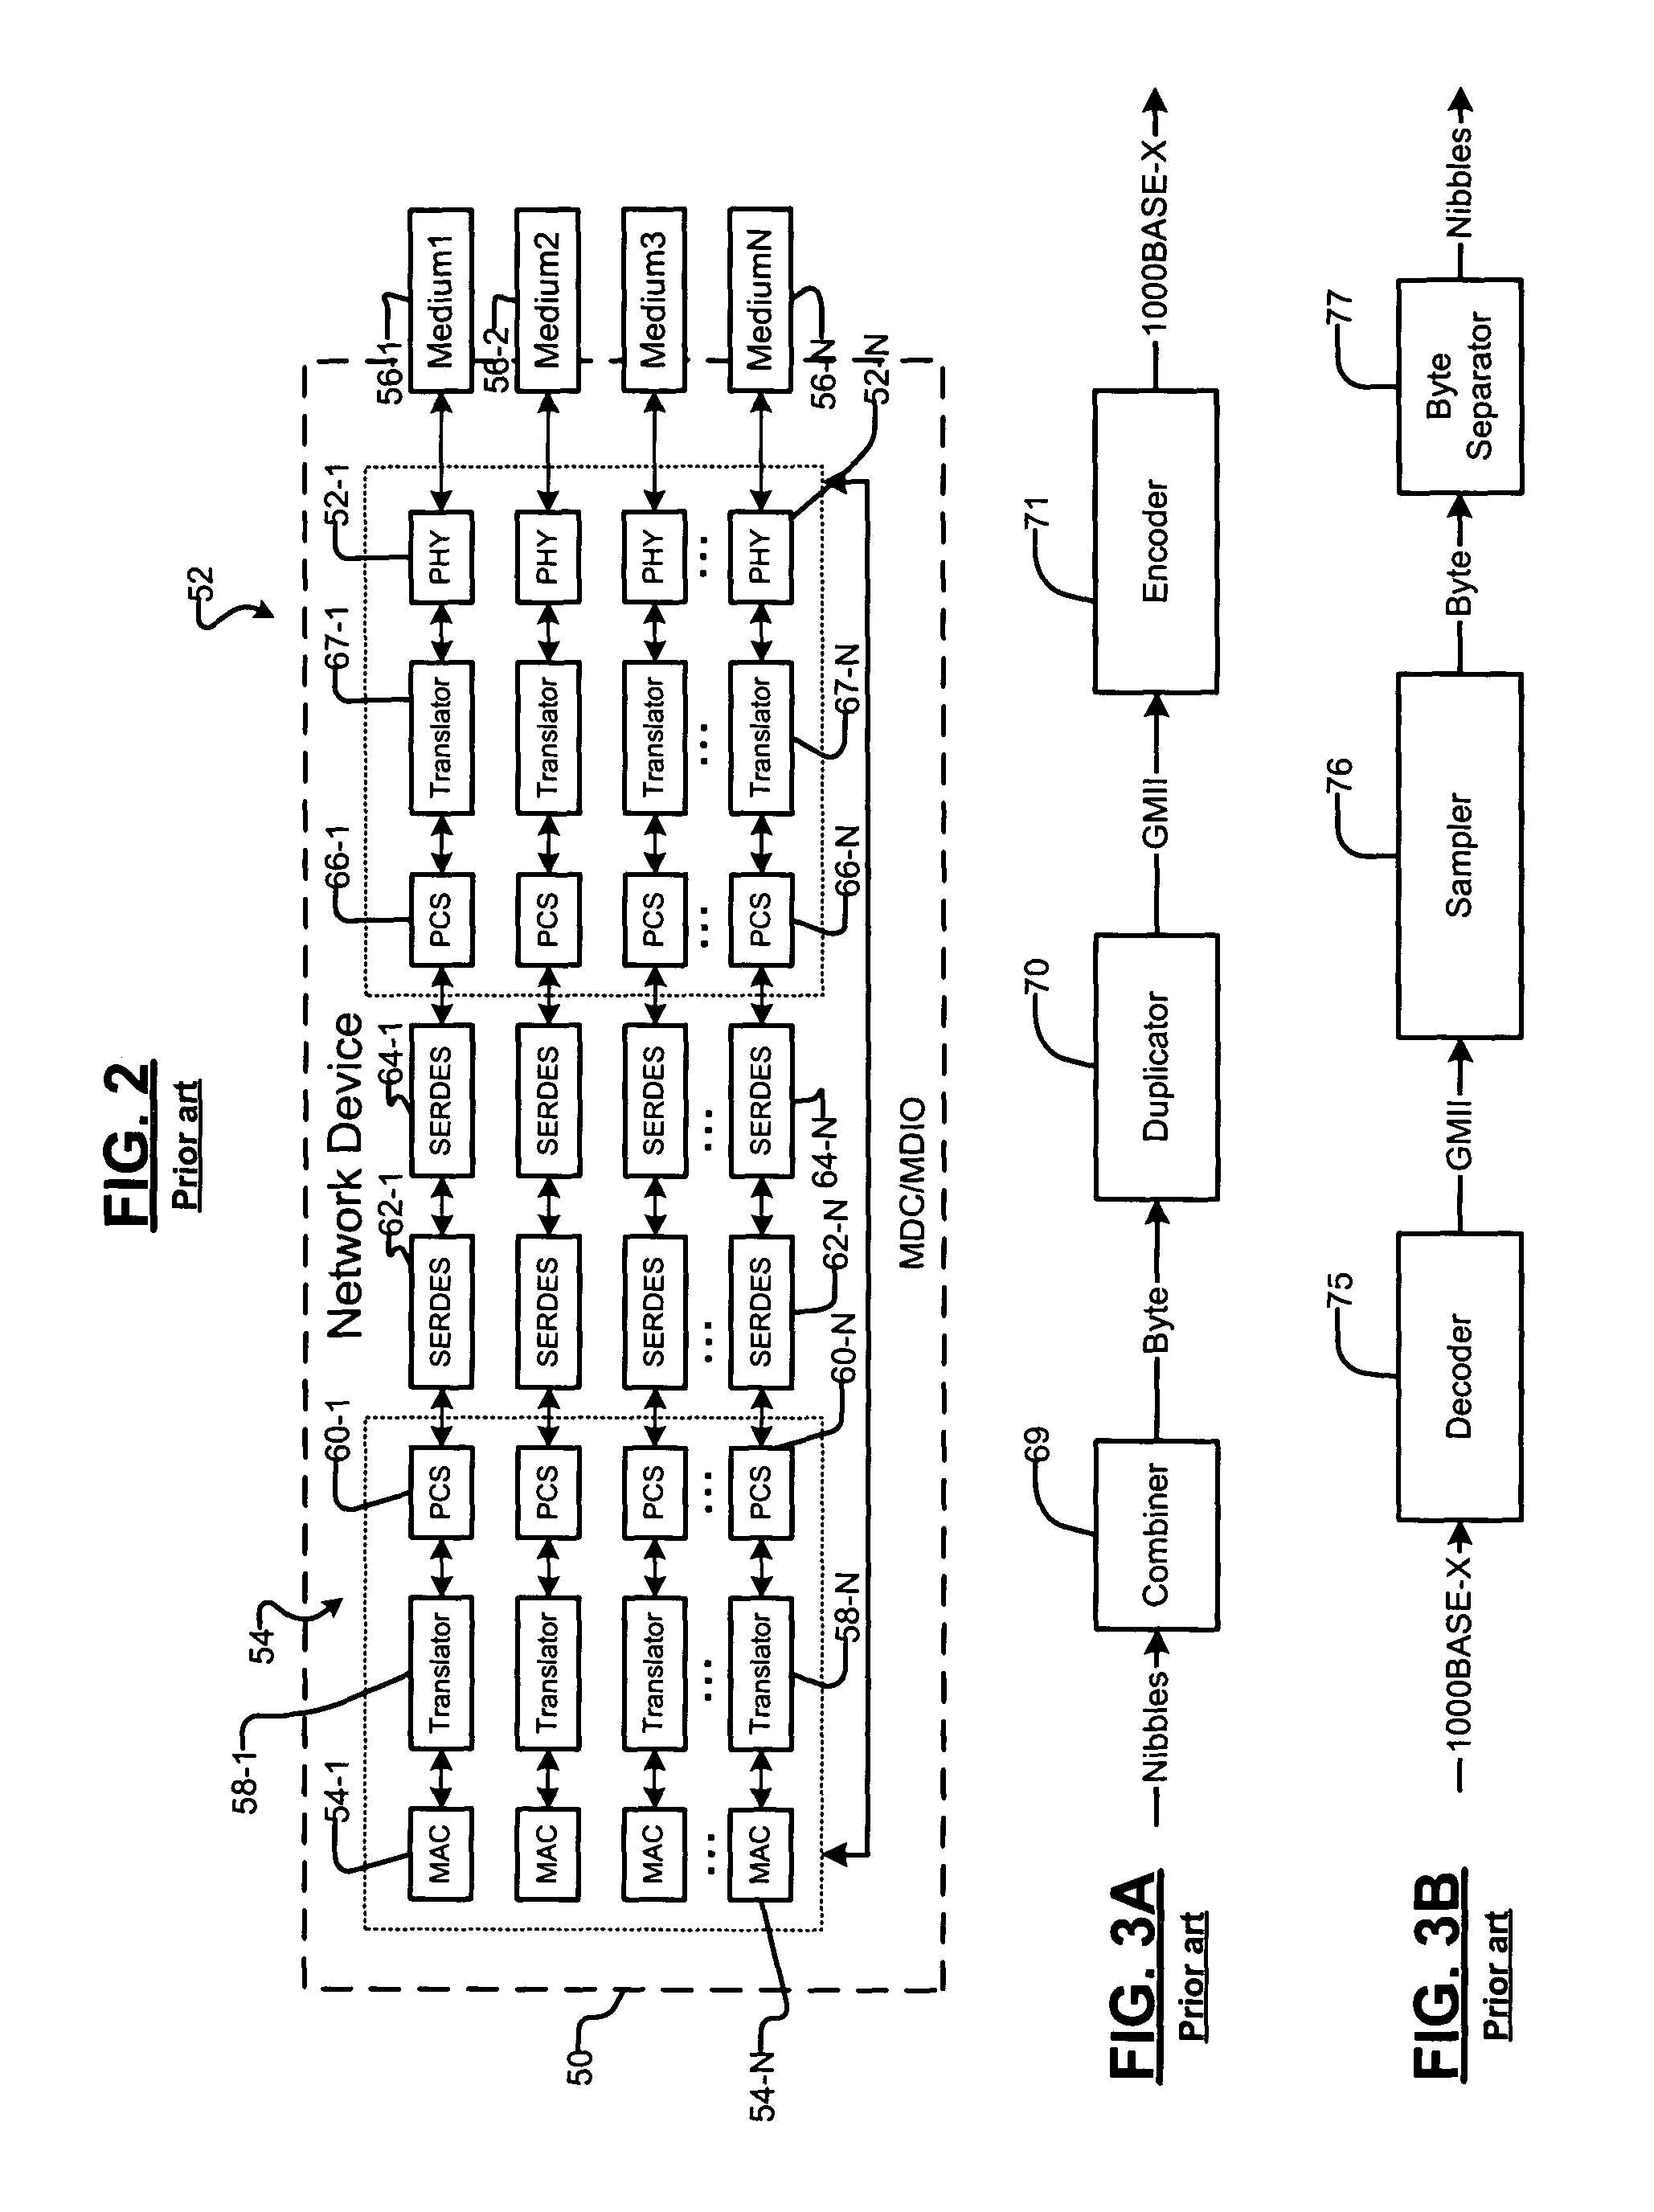 Multi-speed serial interface for media access control and physical layer devices